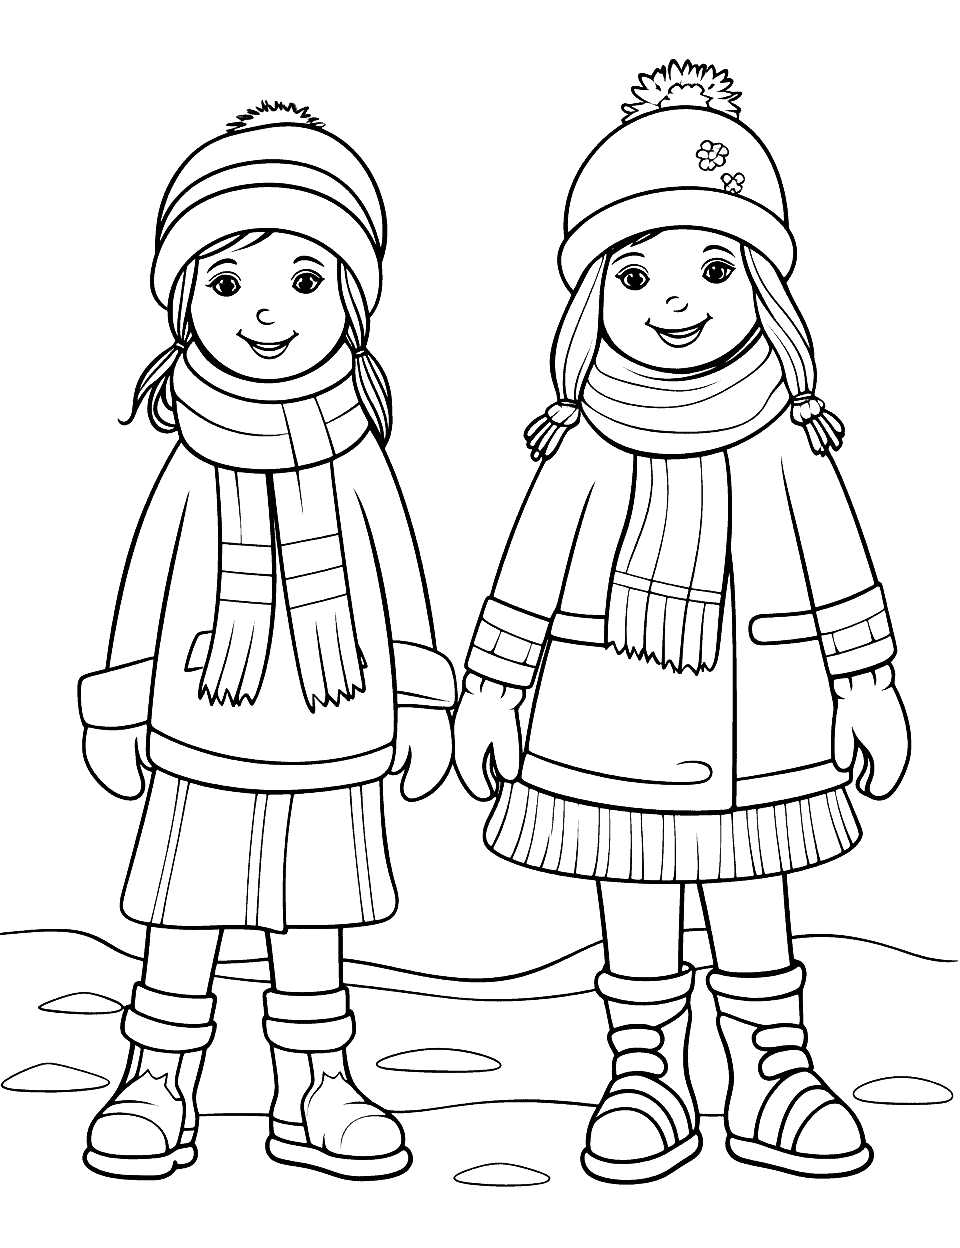 Winter coloring pages free printable sheets